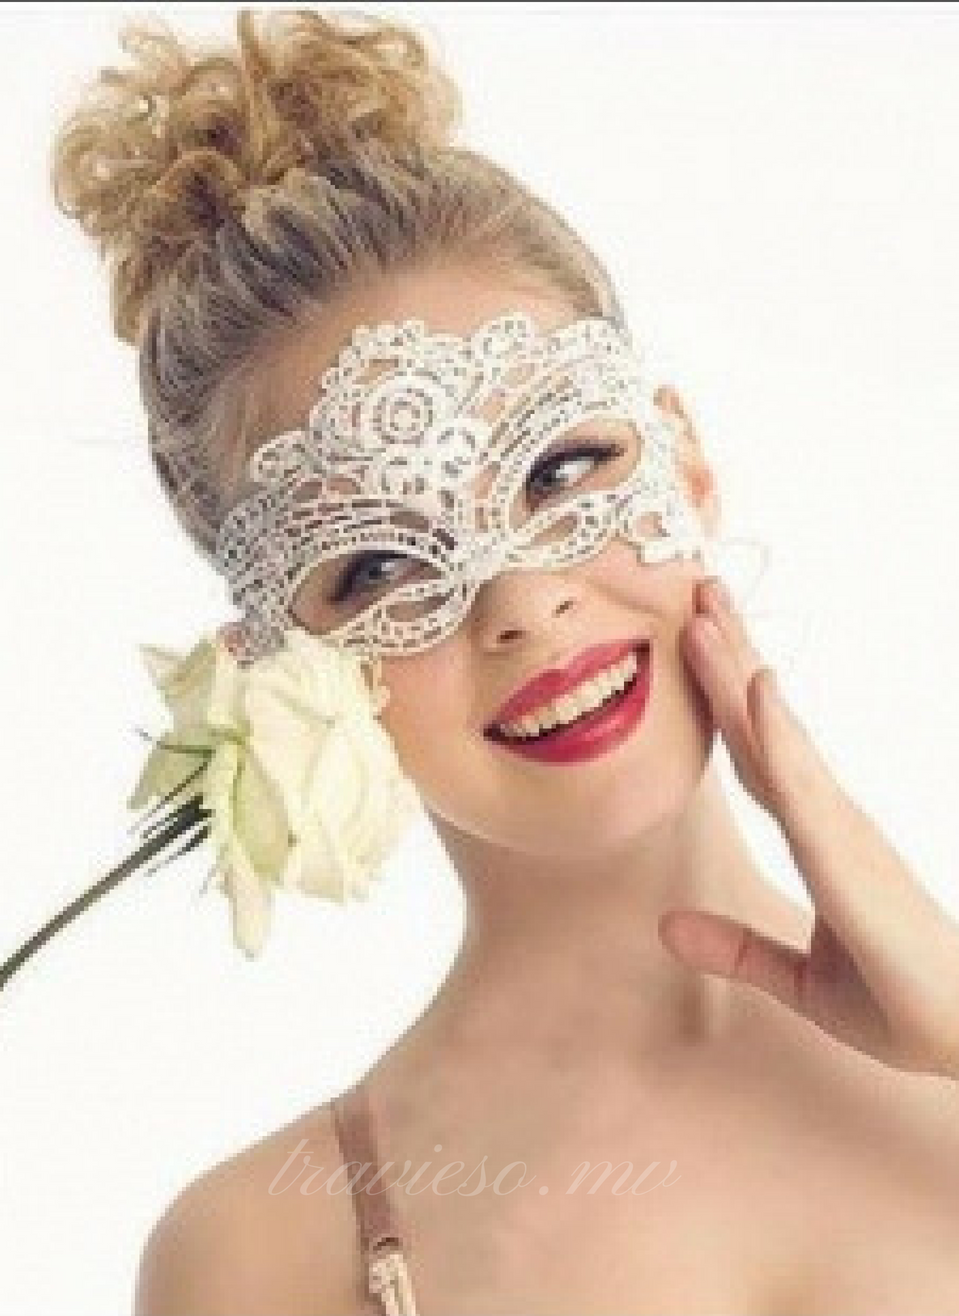 Halloween Masquerade Party Lace Mask - travieso.mv